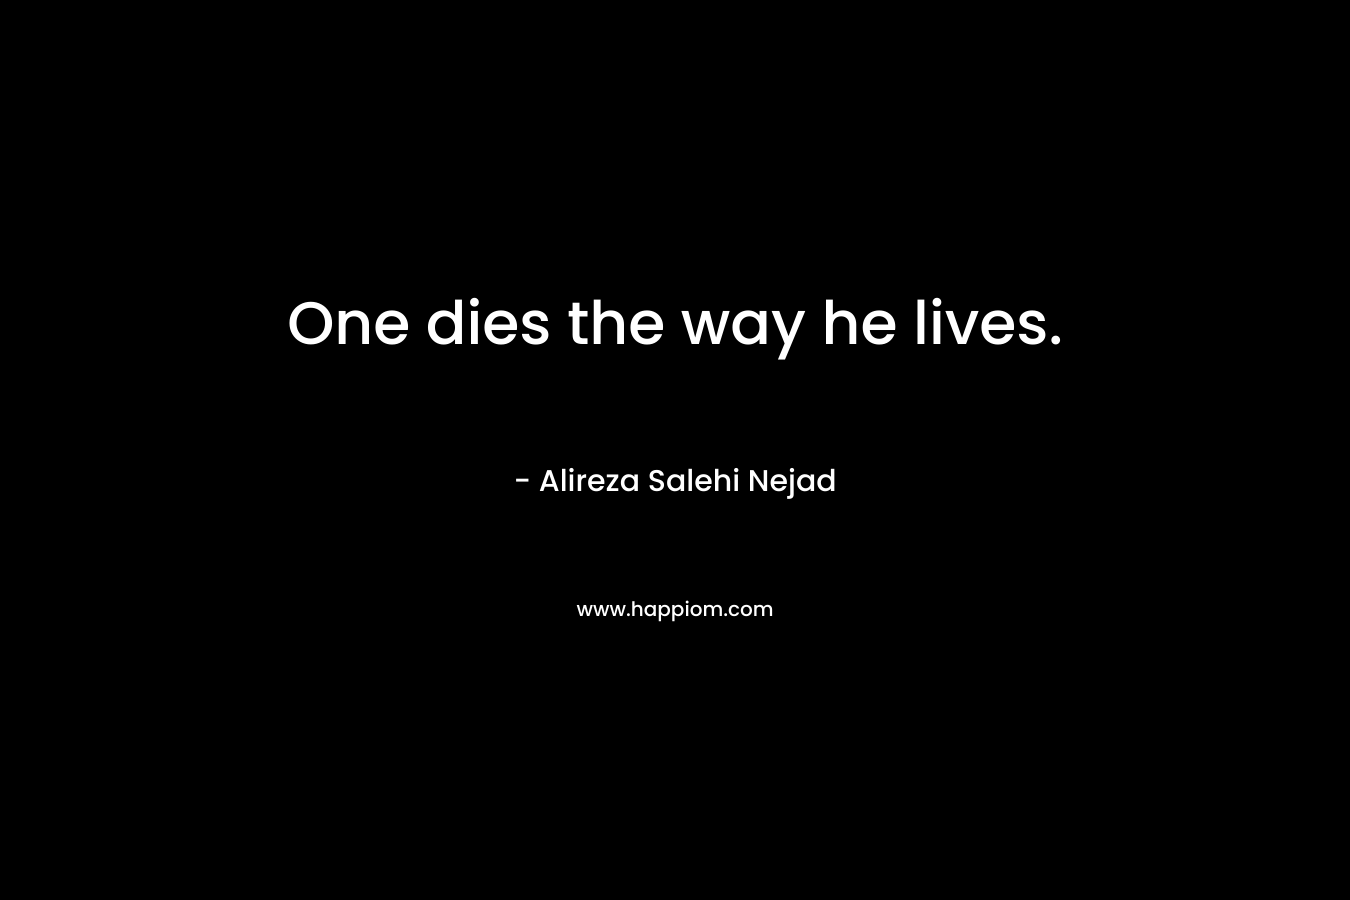 One dies the way he lives.